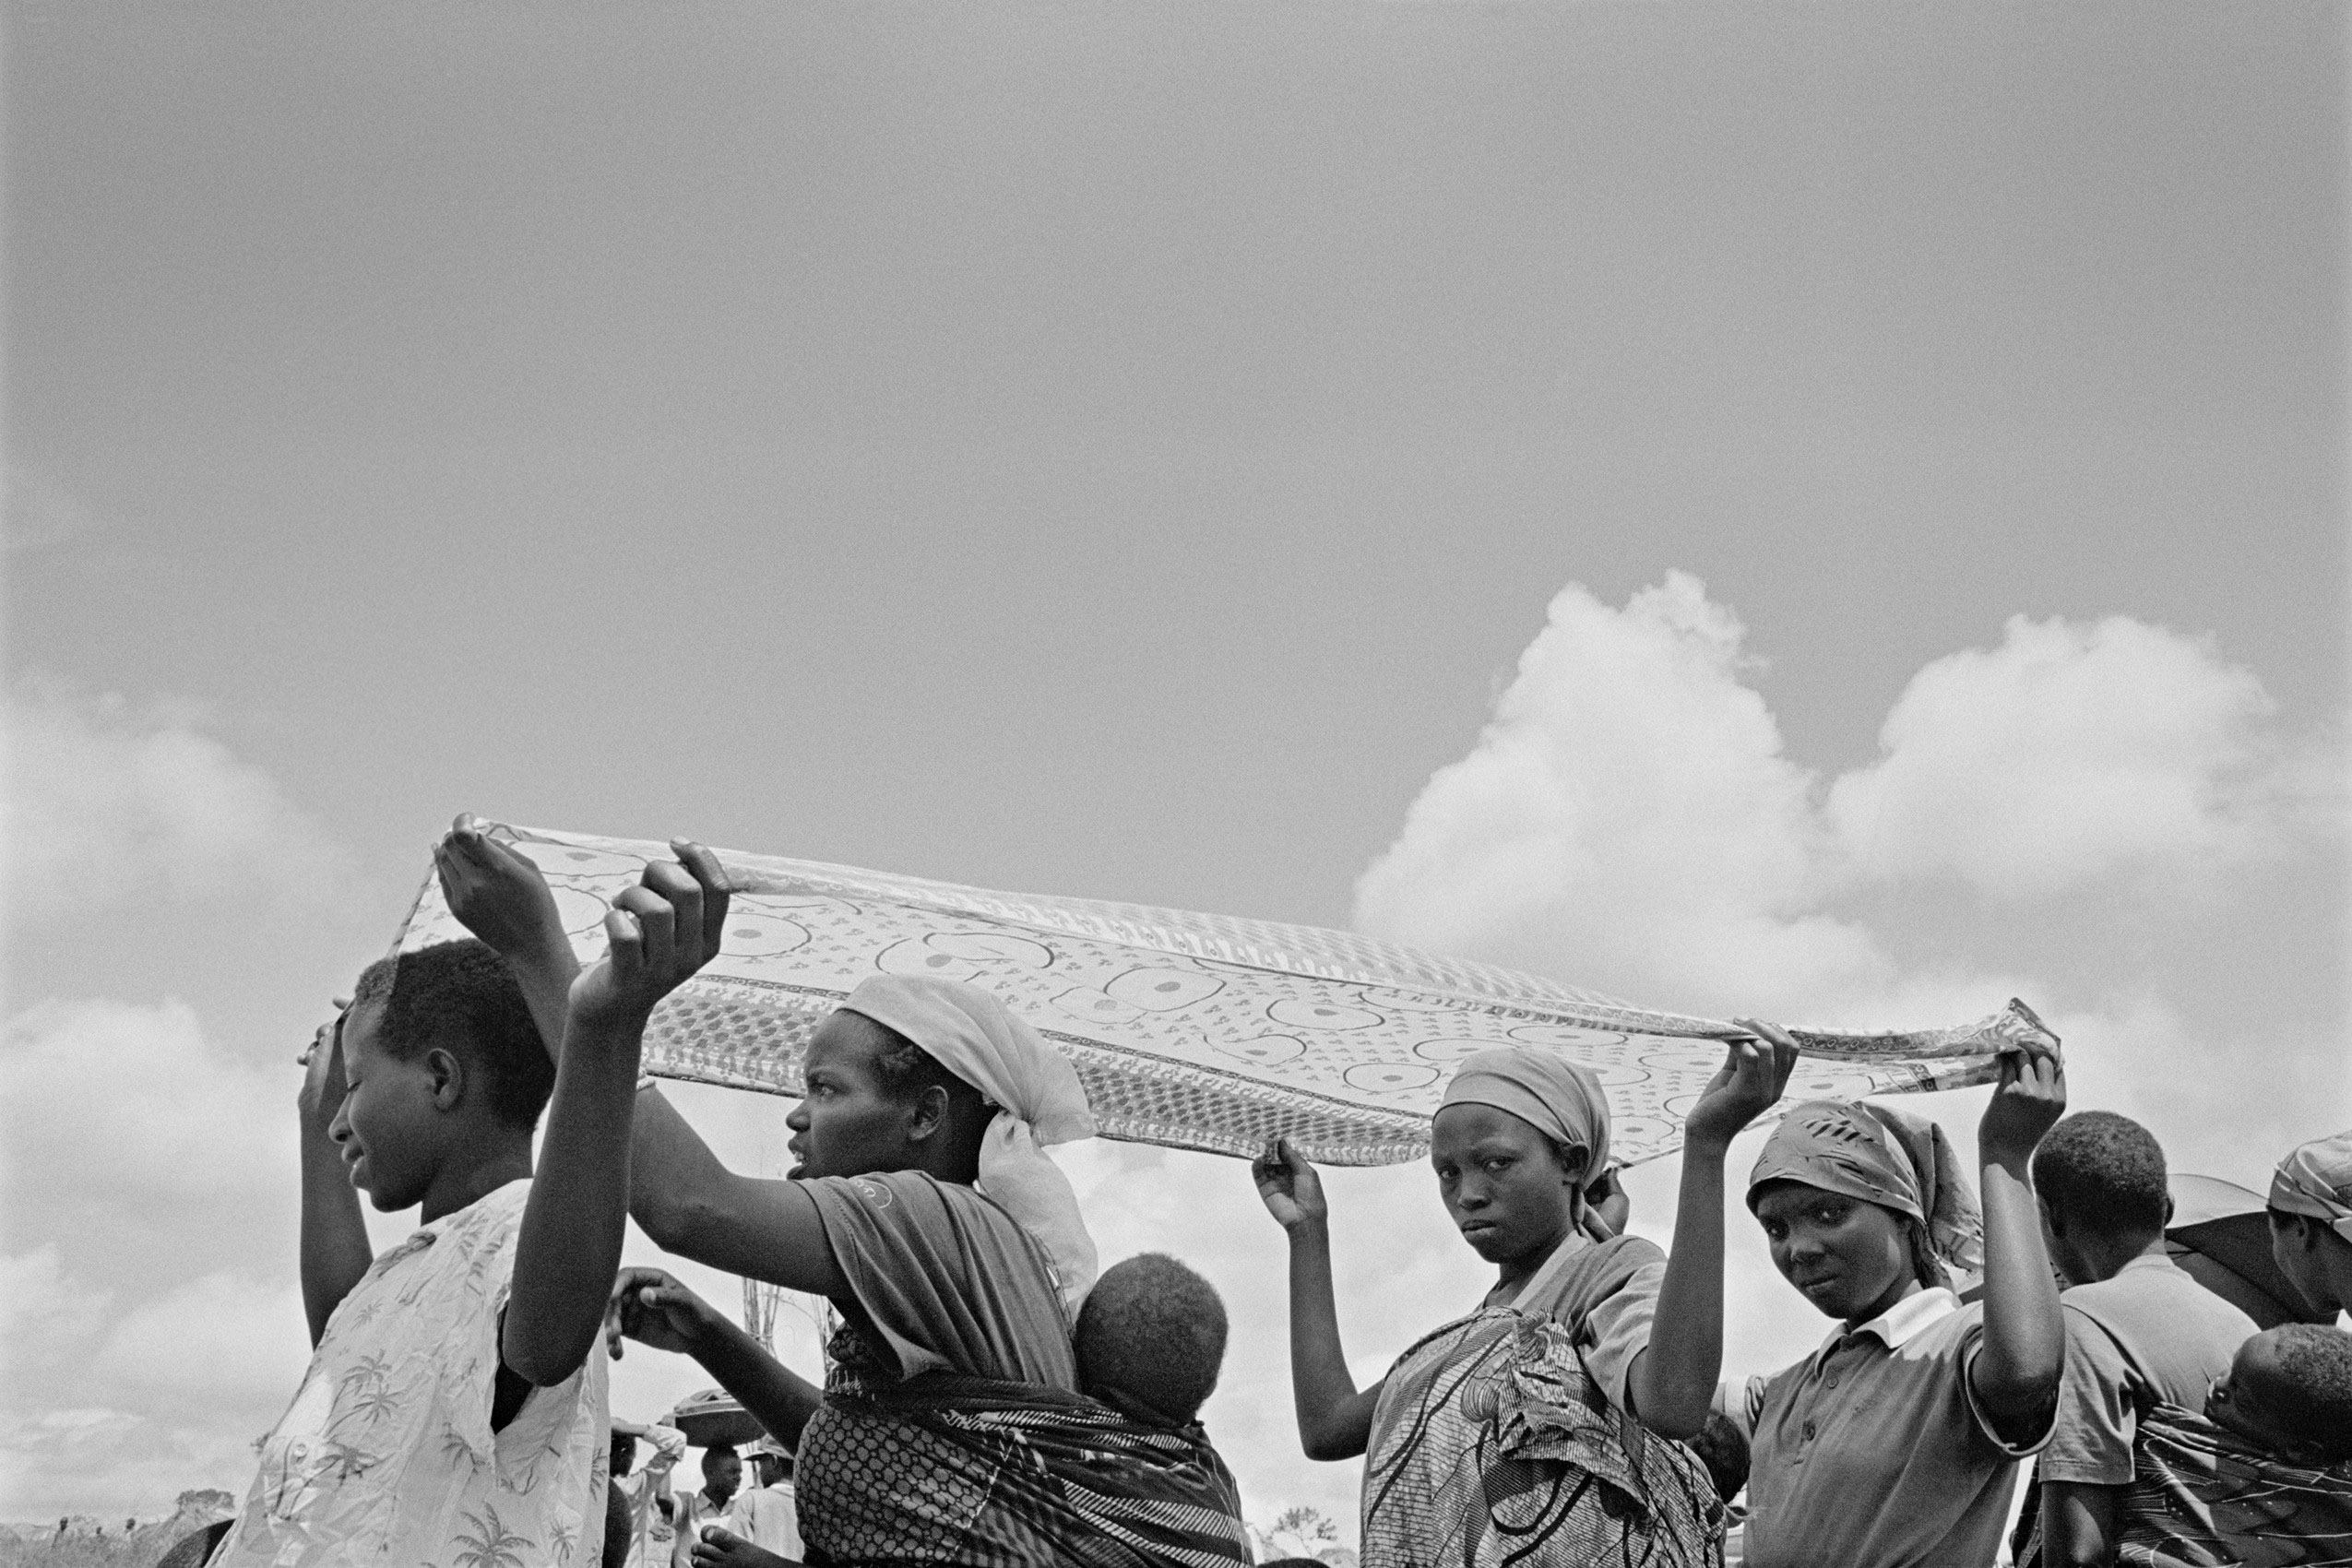 Women and children walk, holding a blanket to shield from the sun.